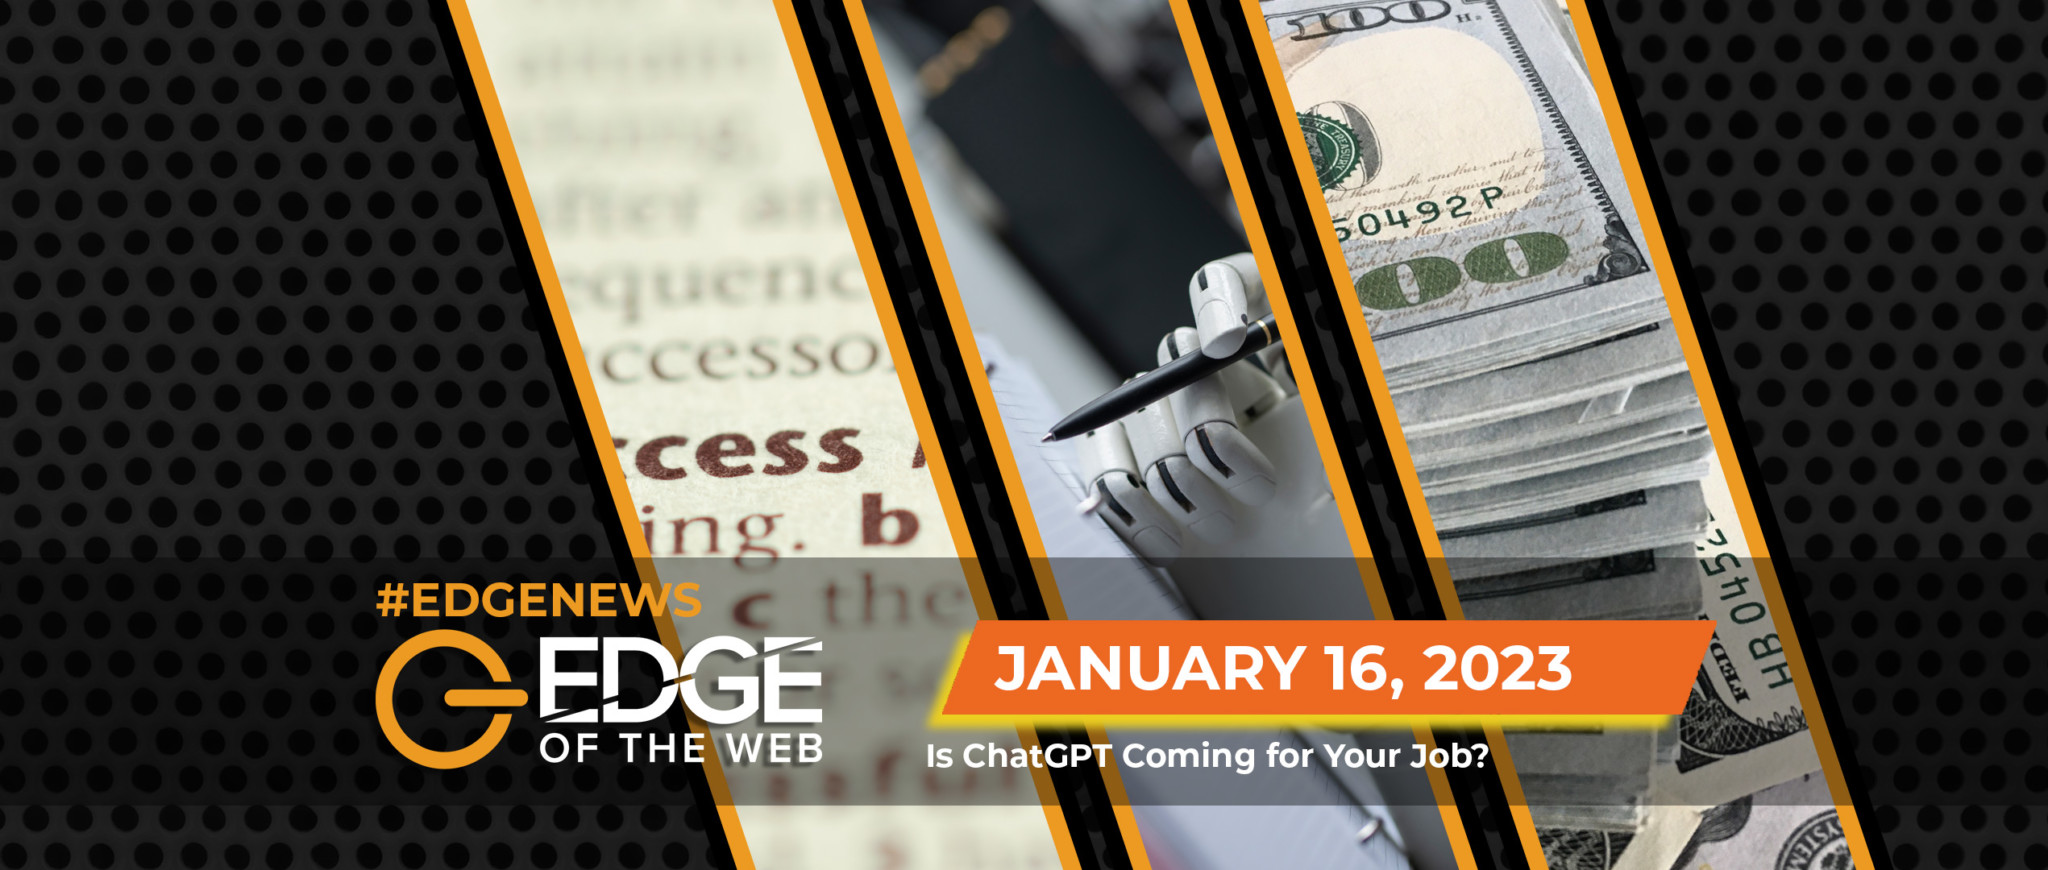 563 | News from the EDGE | Week of 1.17.2023